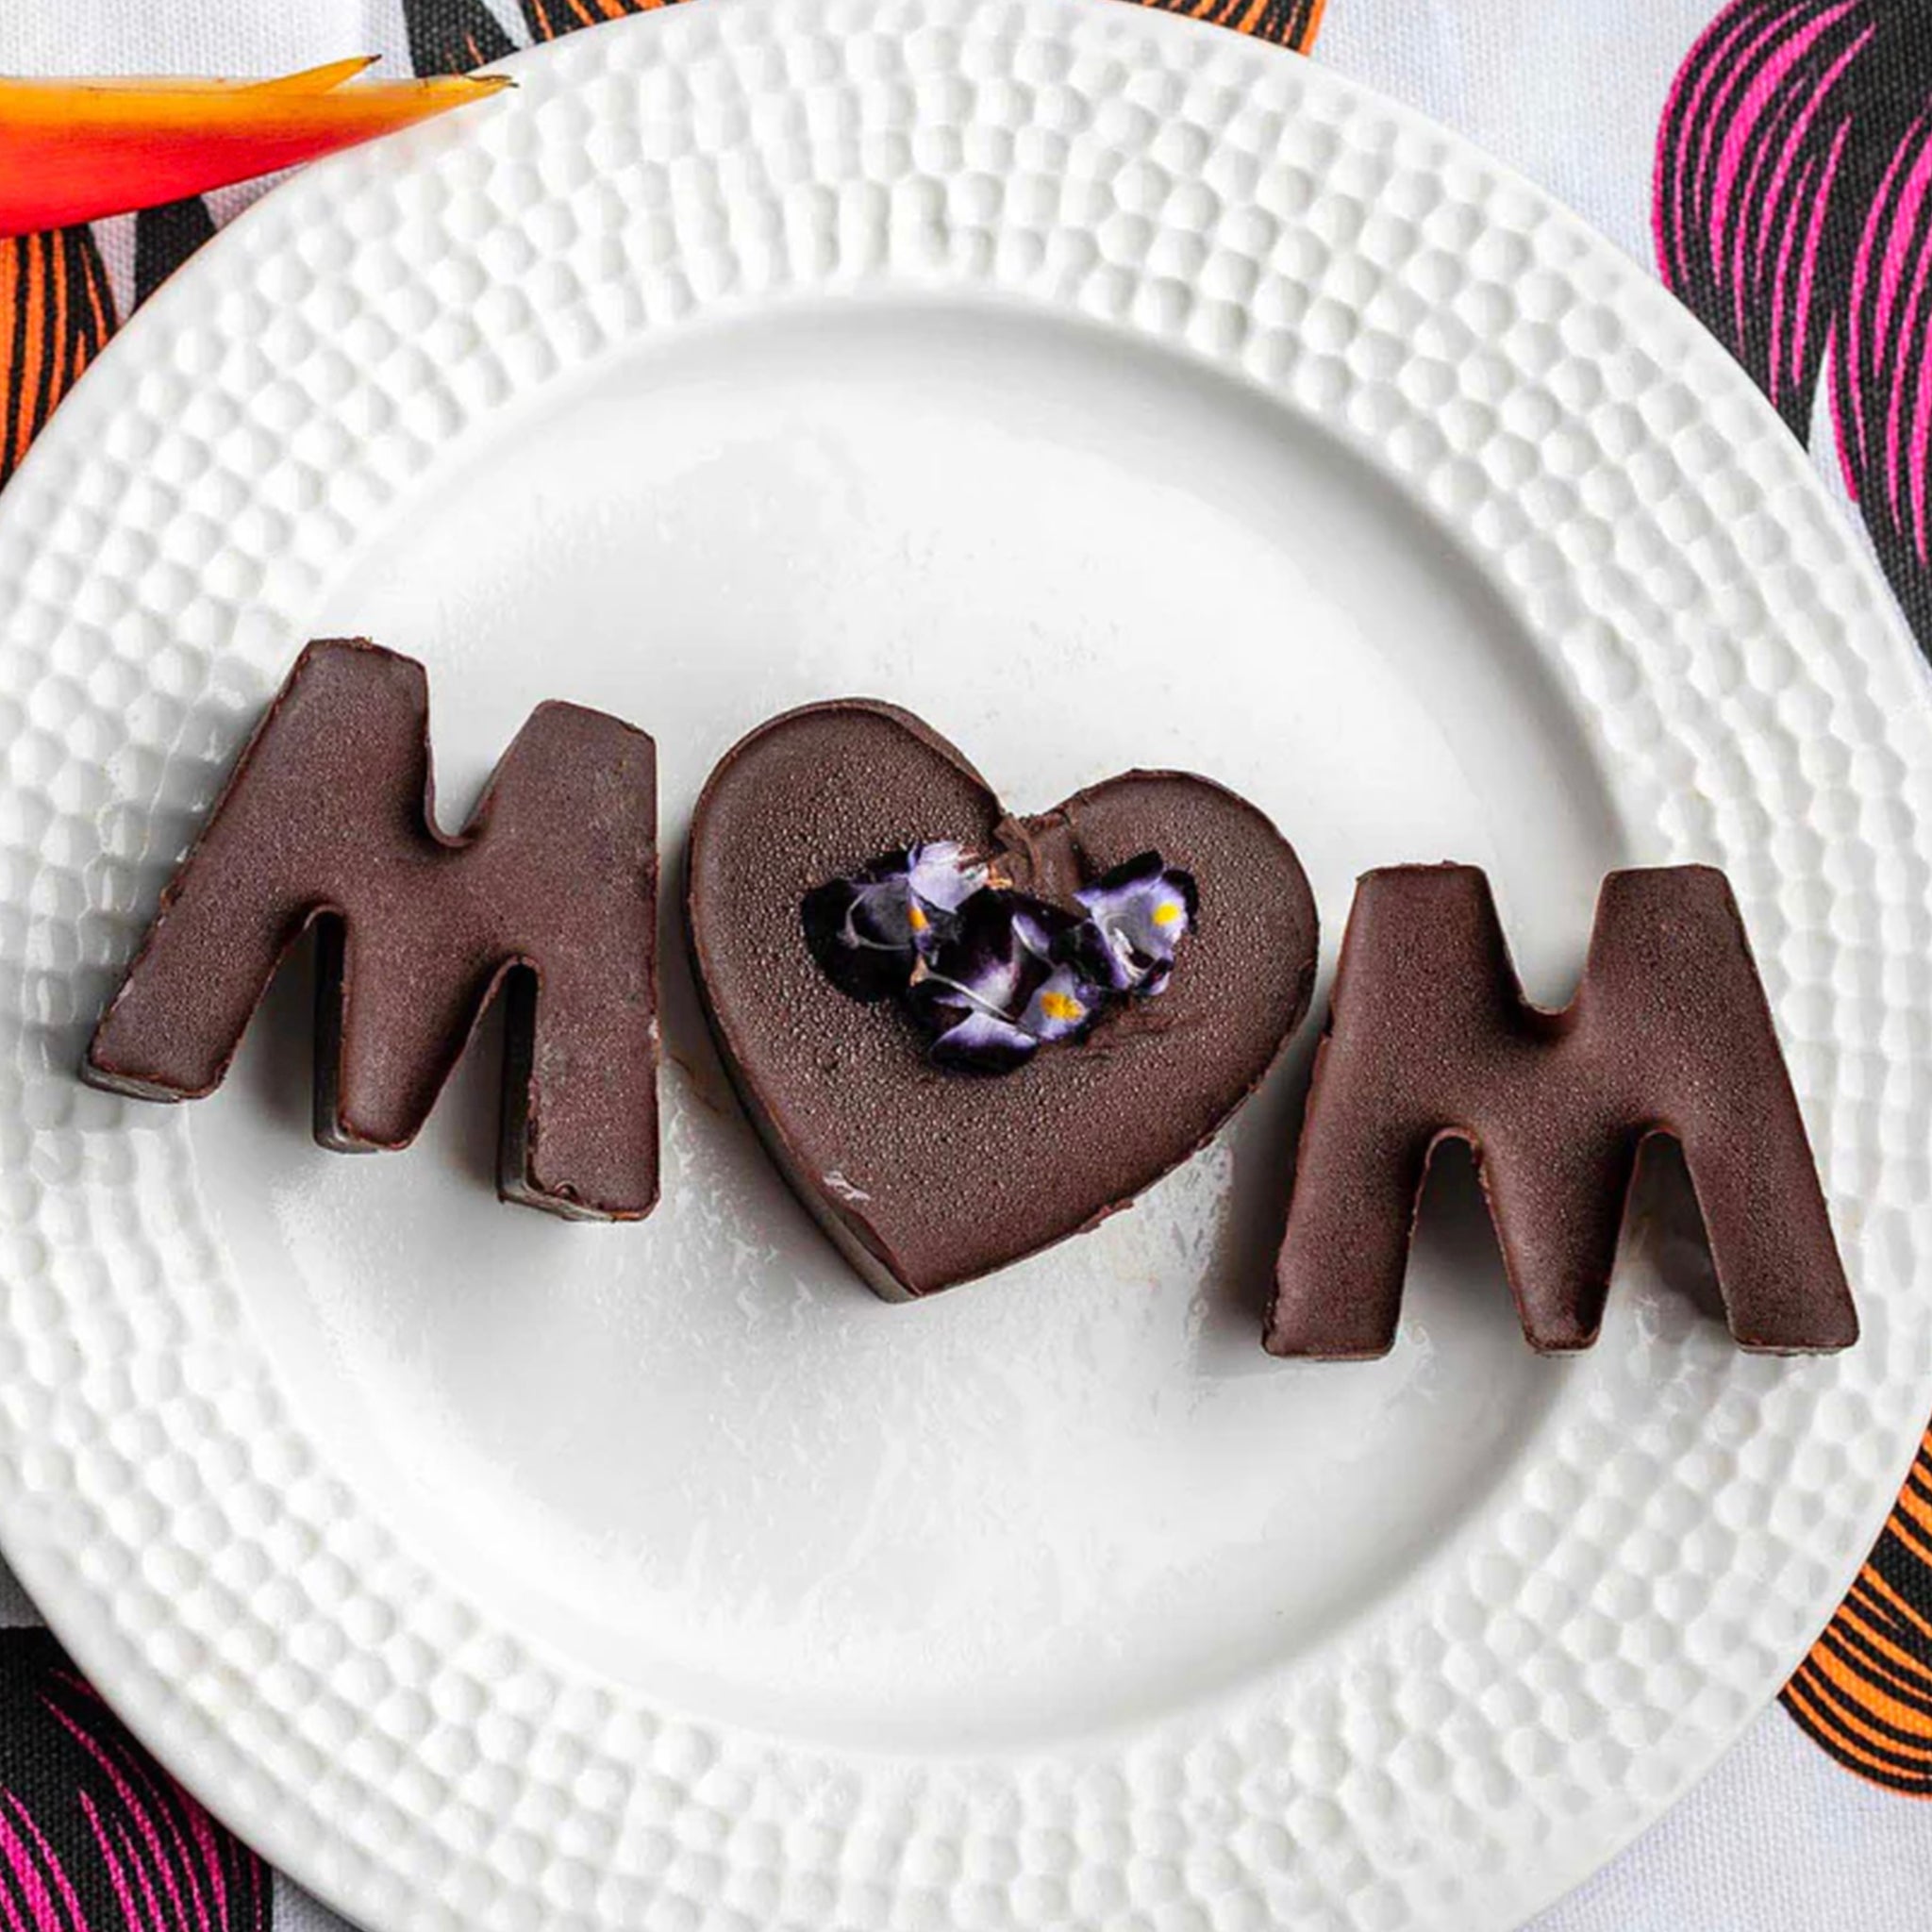 Drinks Plinks Silicone Ice / Baking Tray - M is for Mum Pink